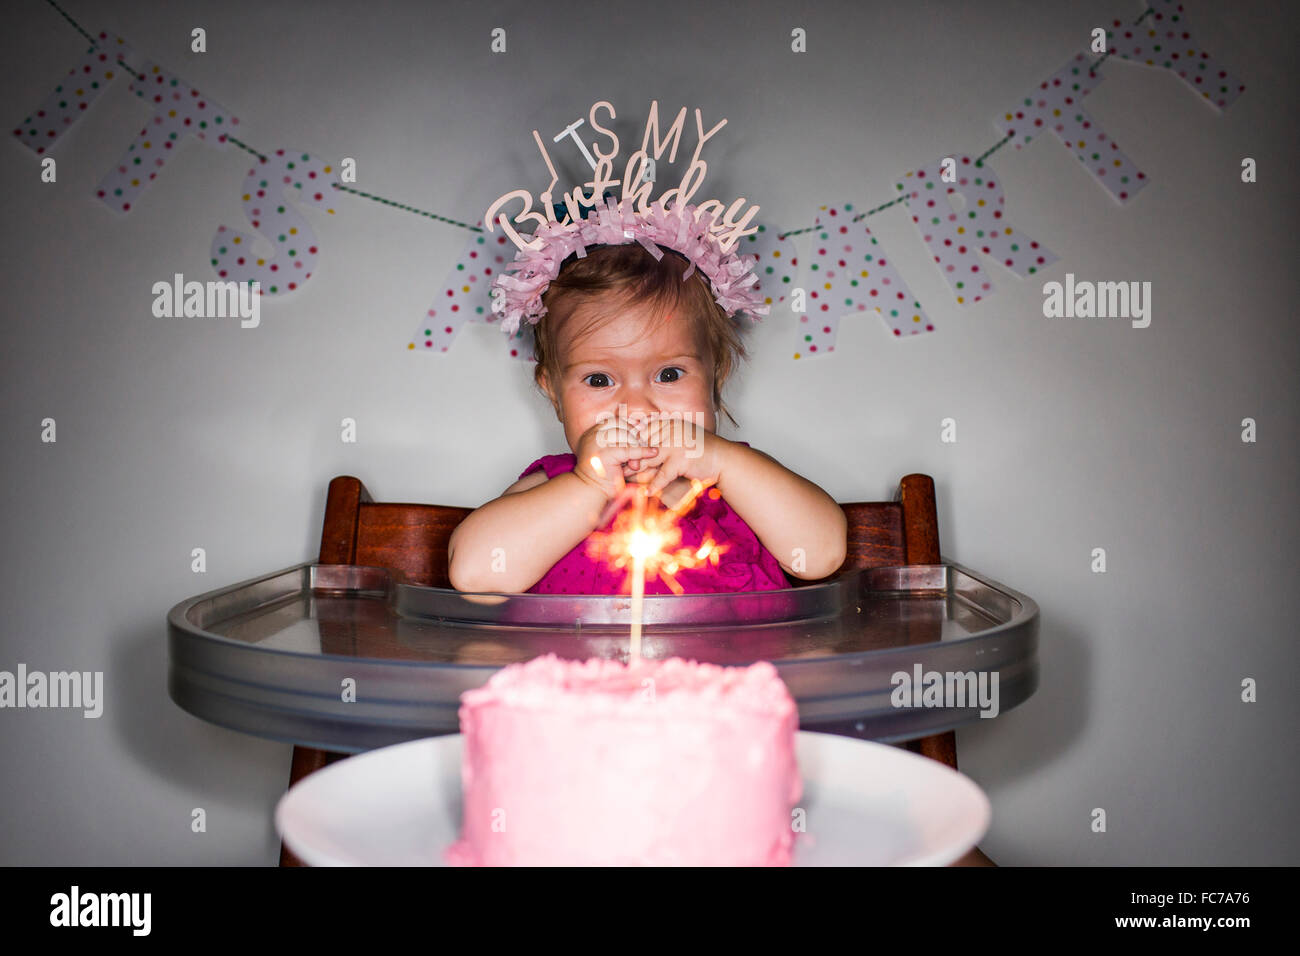 Caucasian baby girl admiring birthday cupcake Banque D'Images